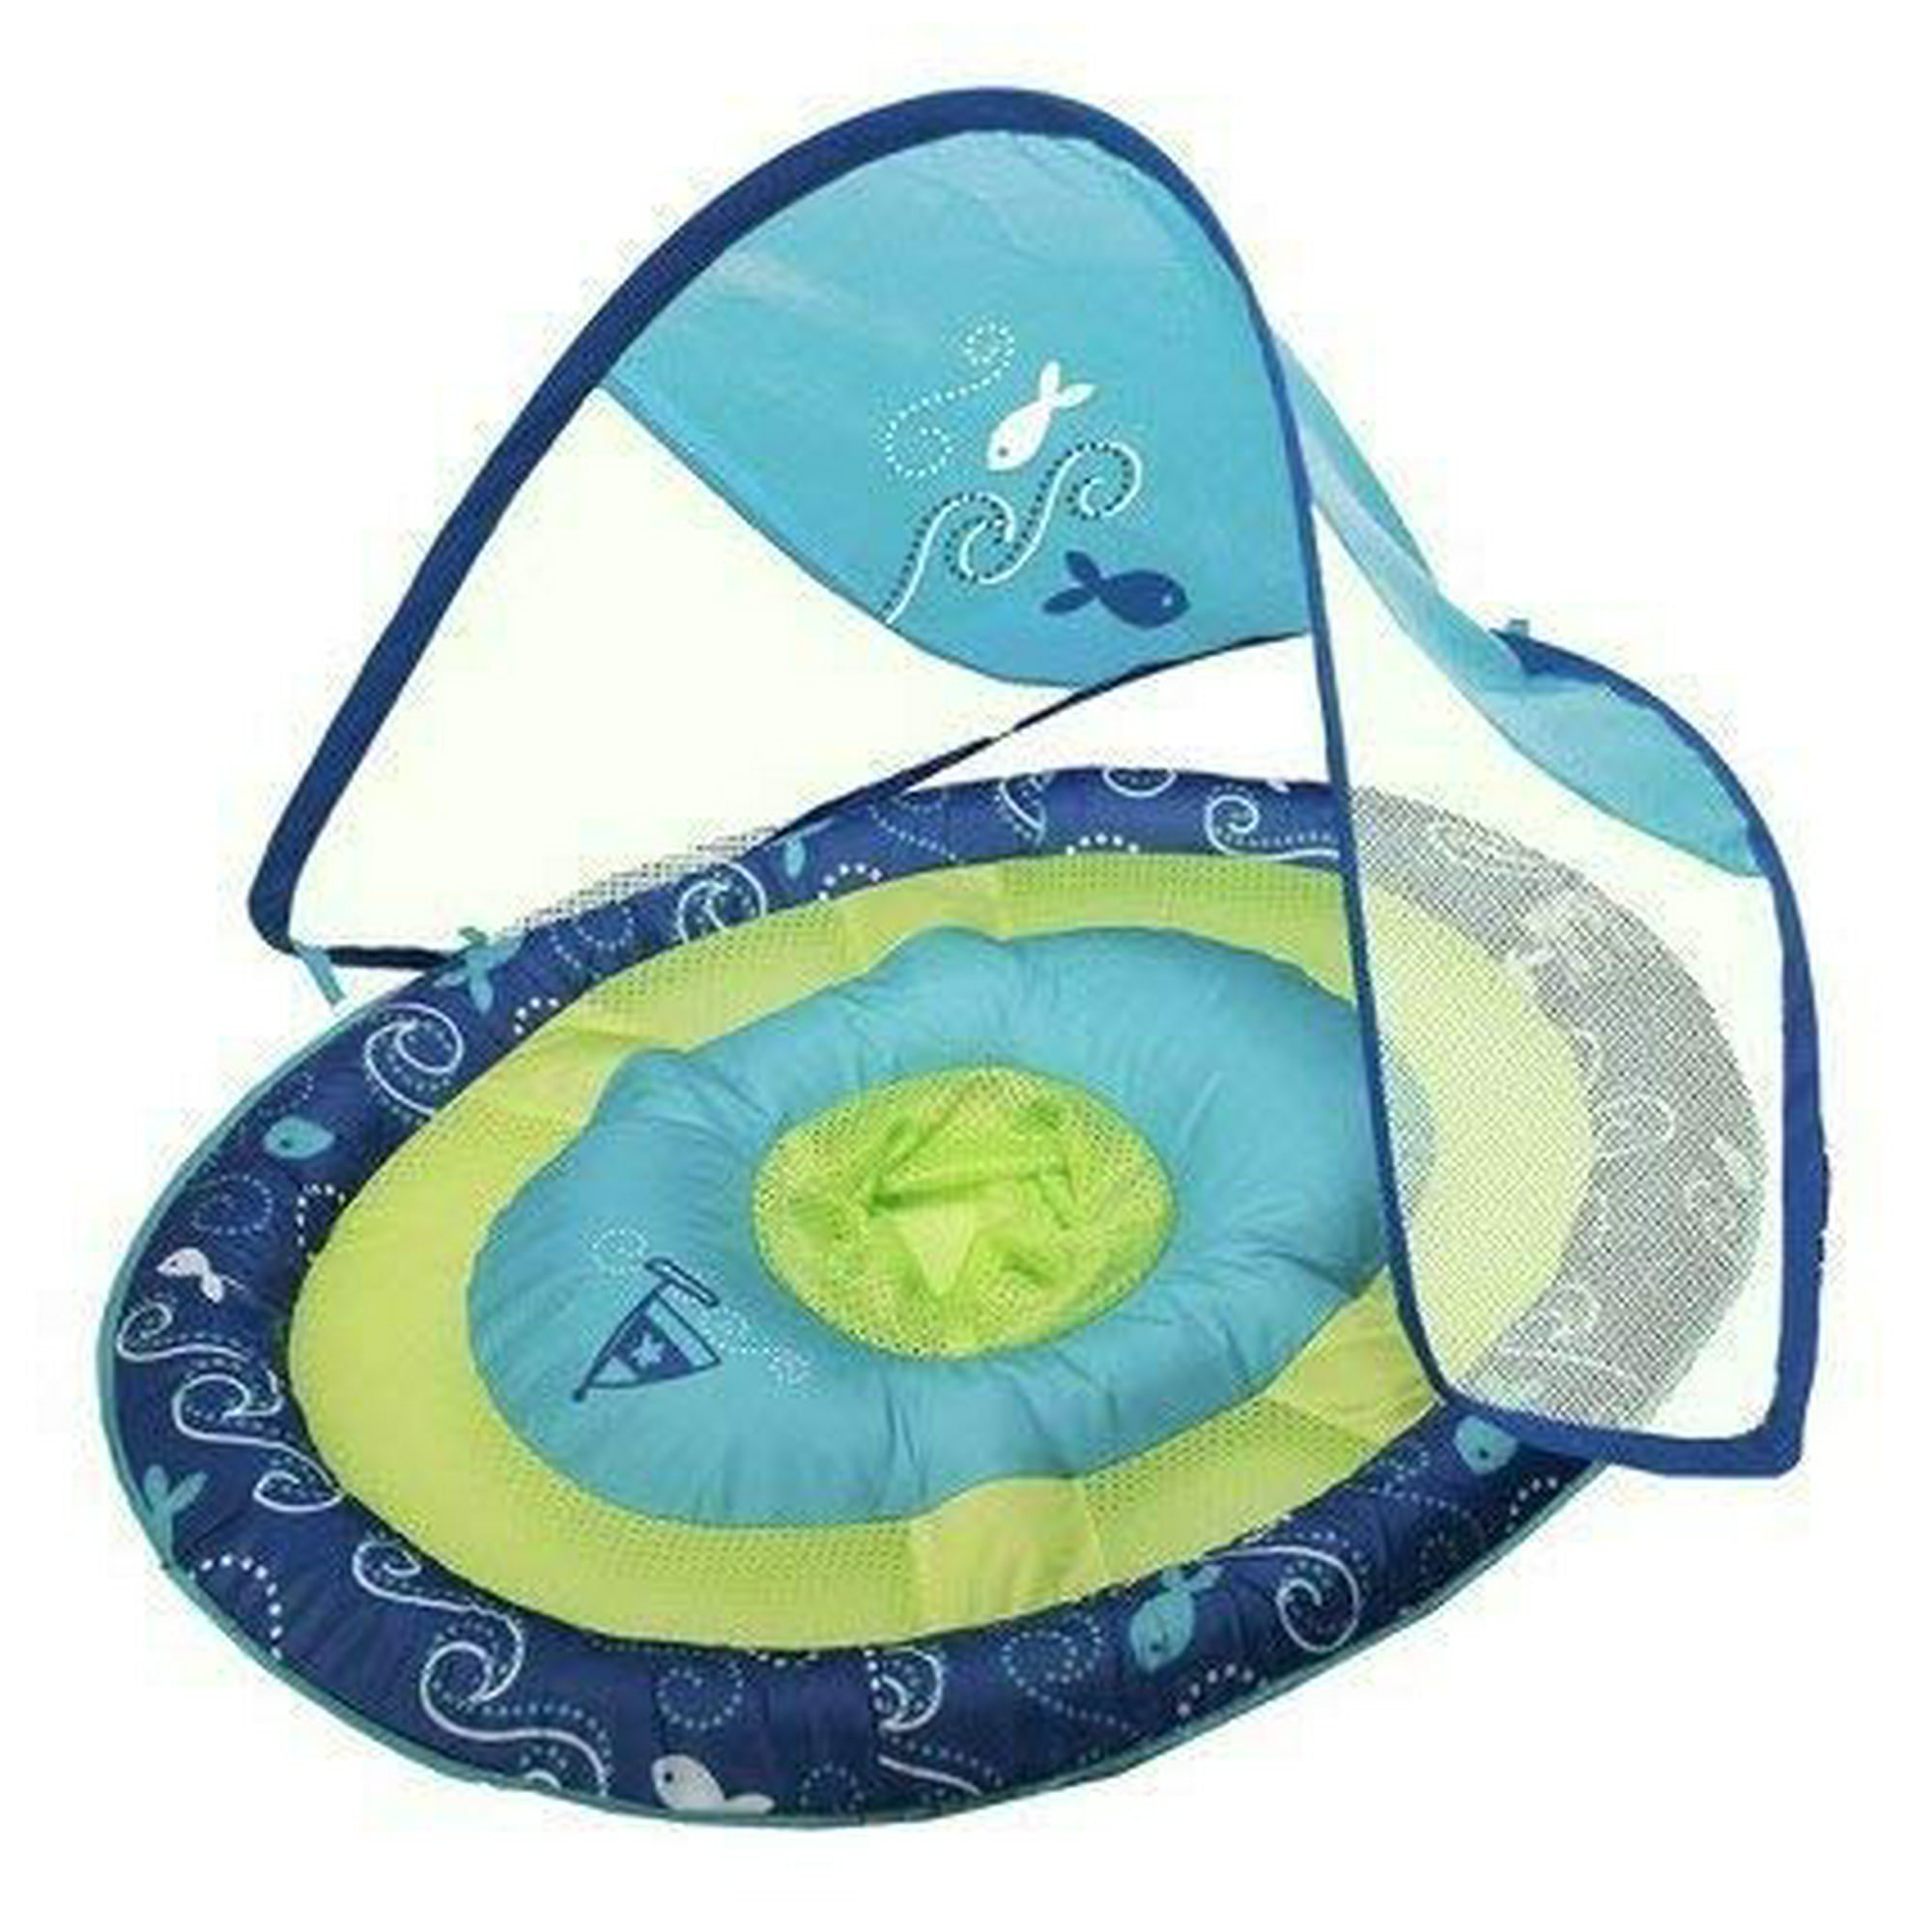 SwimWays Baby Spring Float Sun canopy - Teal and Lime (Sail Boat and Fish)  | Walmart Canada